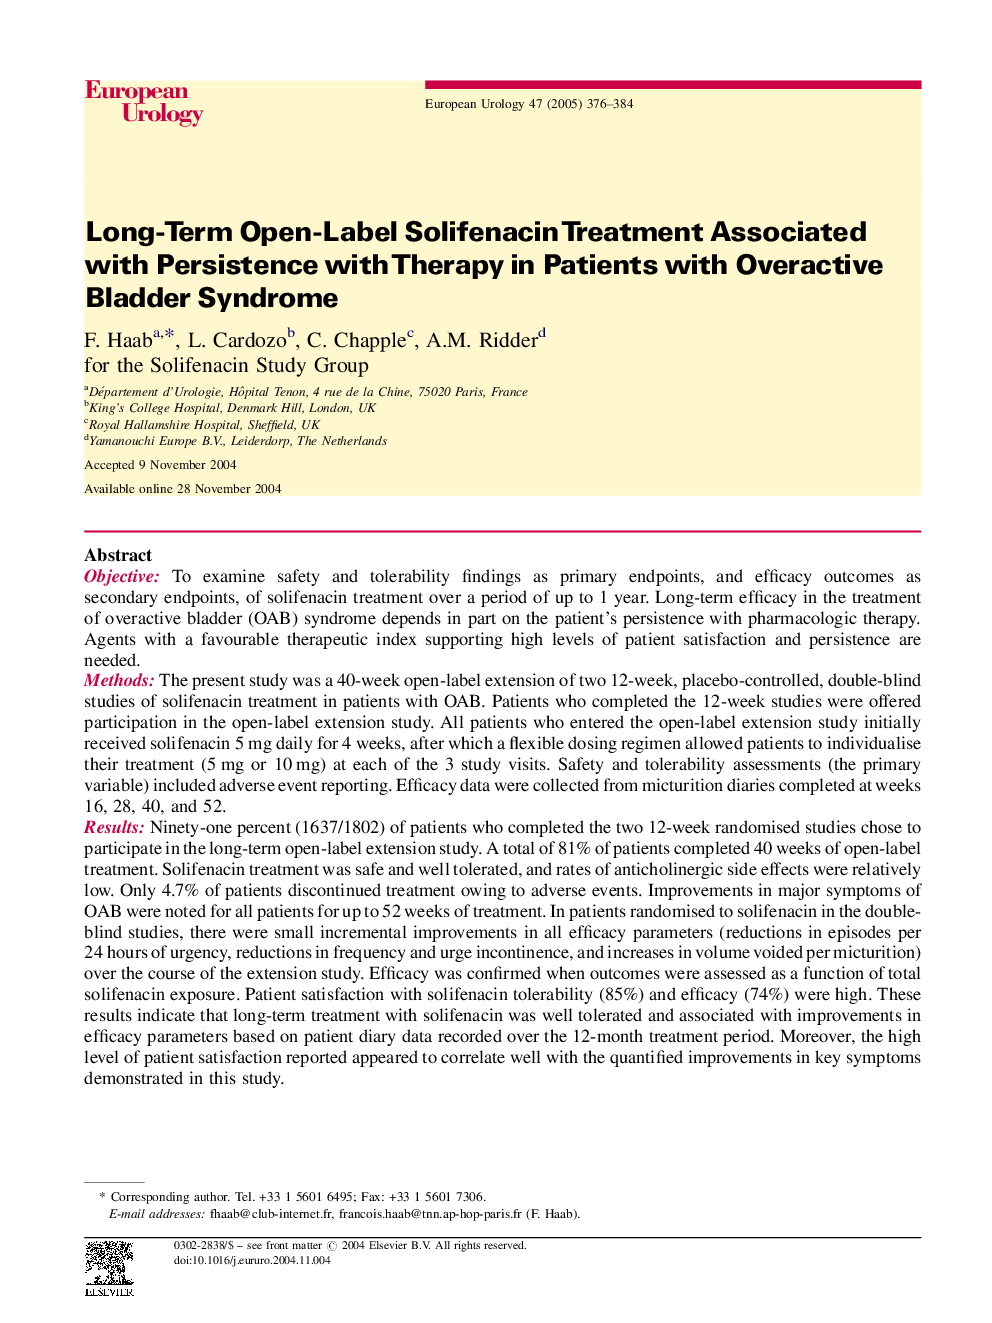 Long-Term Open-Label Solifenacin Treatment Associated with Persistence with Therapy in Patients with Overactive Bladder Syndrome